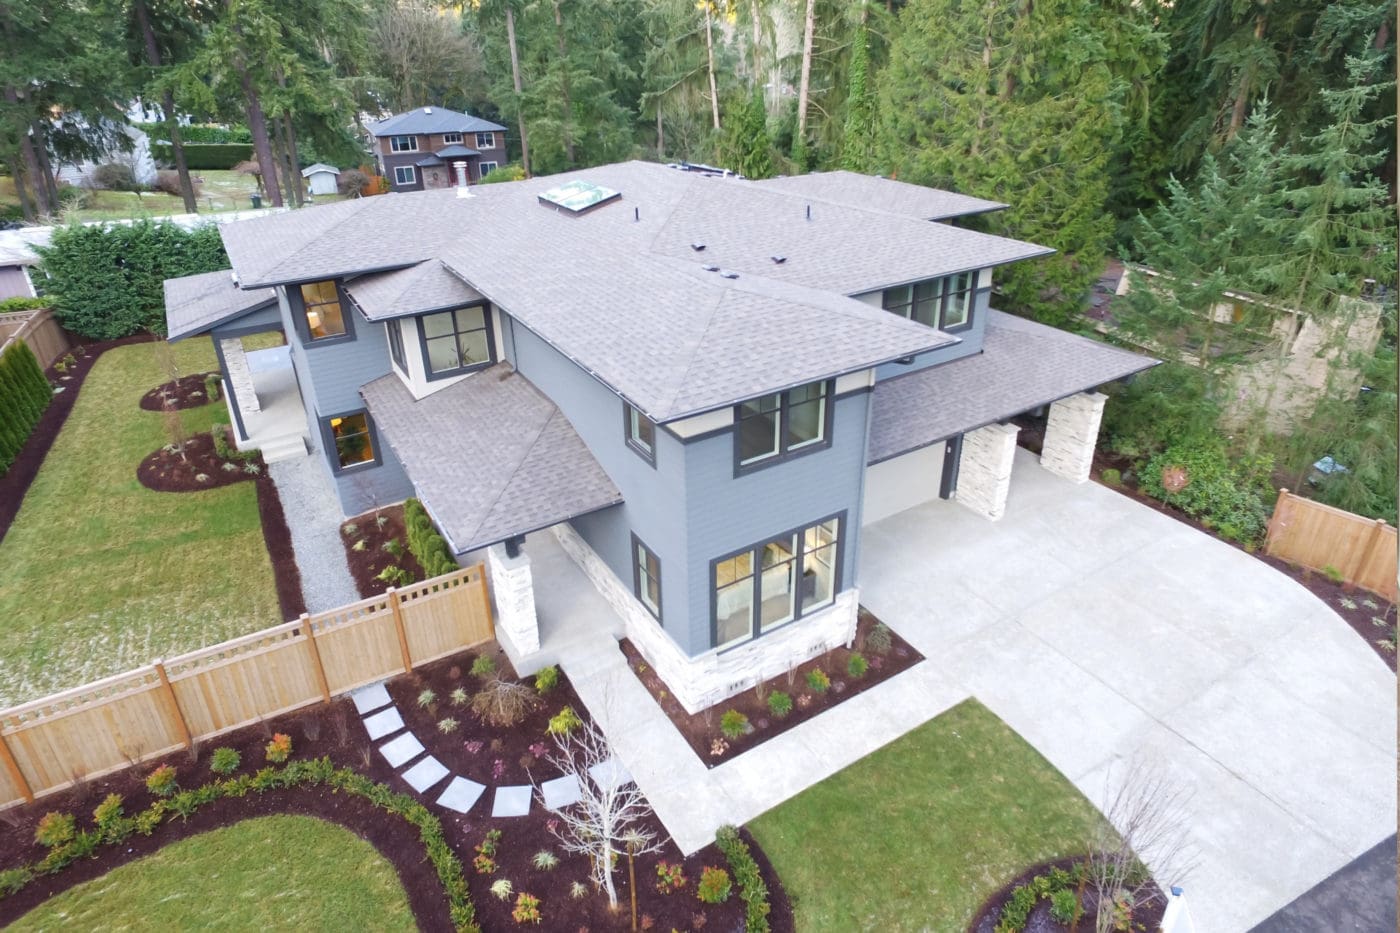 Real Estate Drone Photography Is Standard On All Listings
